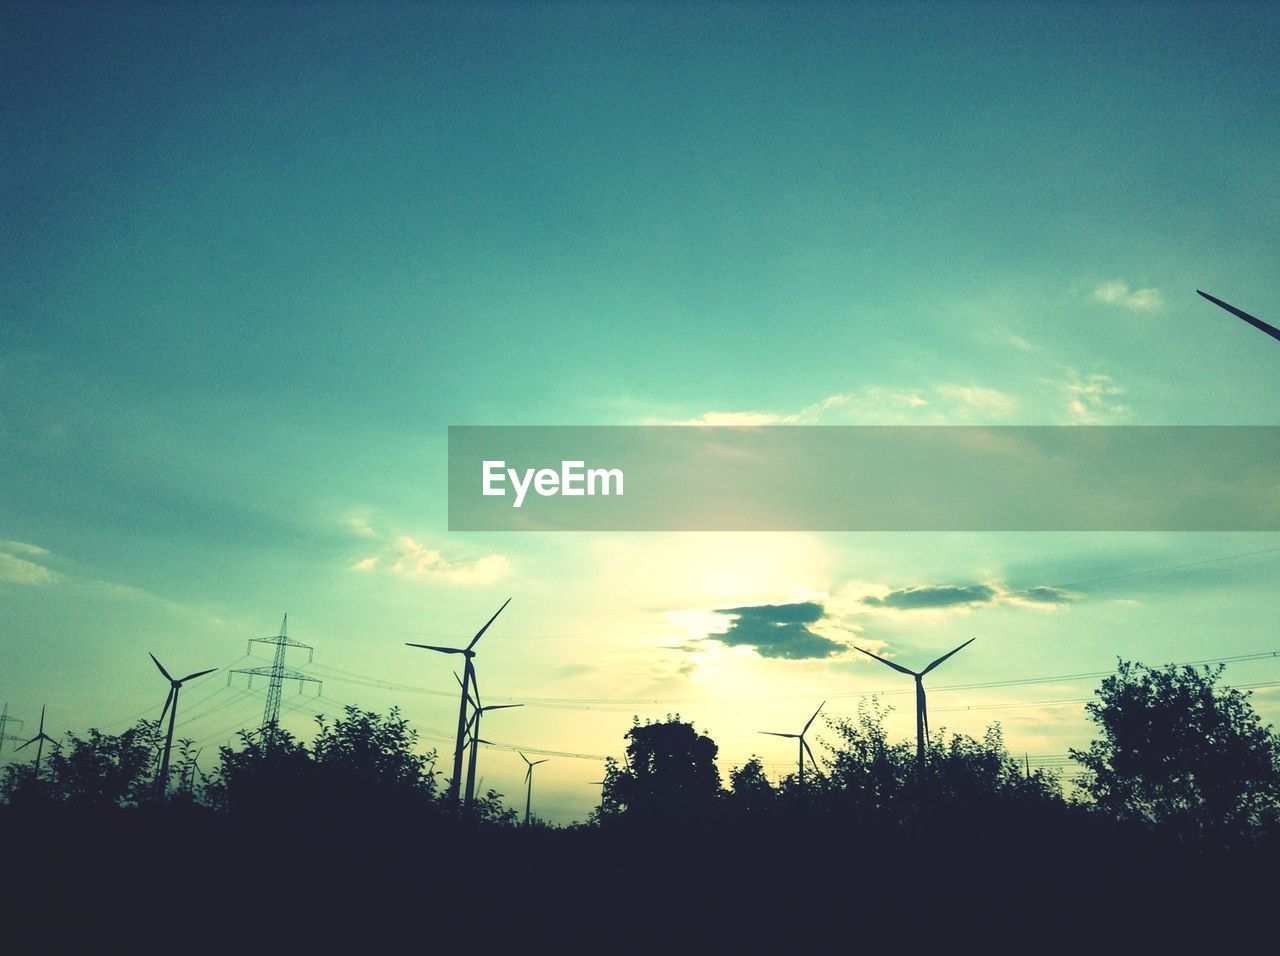 Silhouette of wind turbines and power lines at sunset